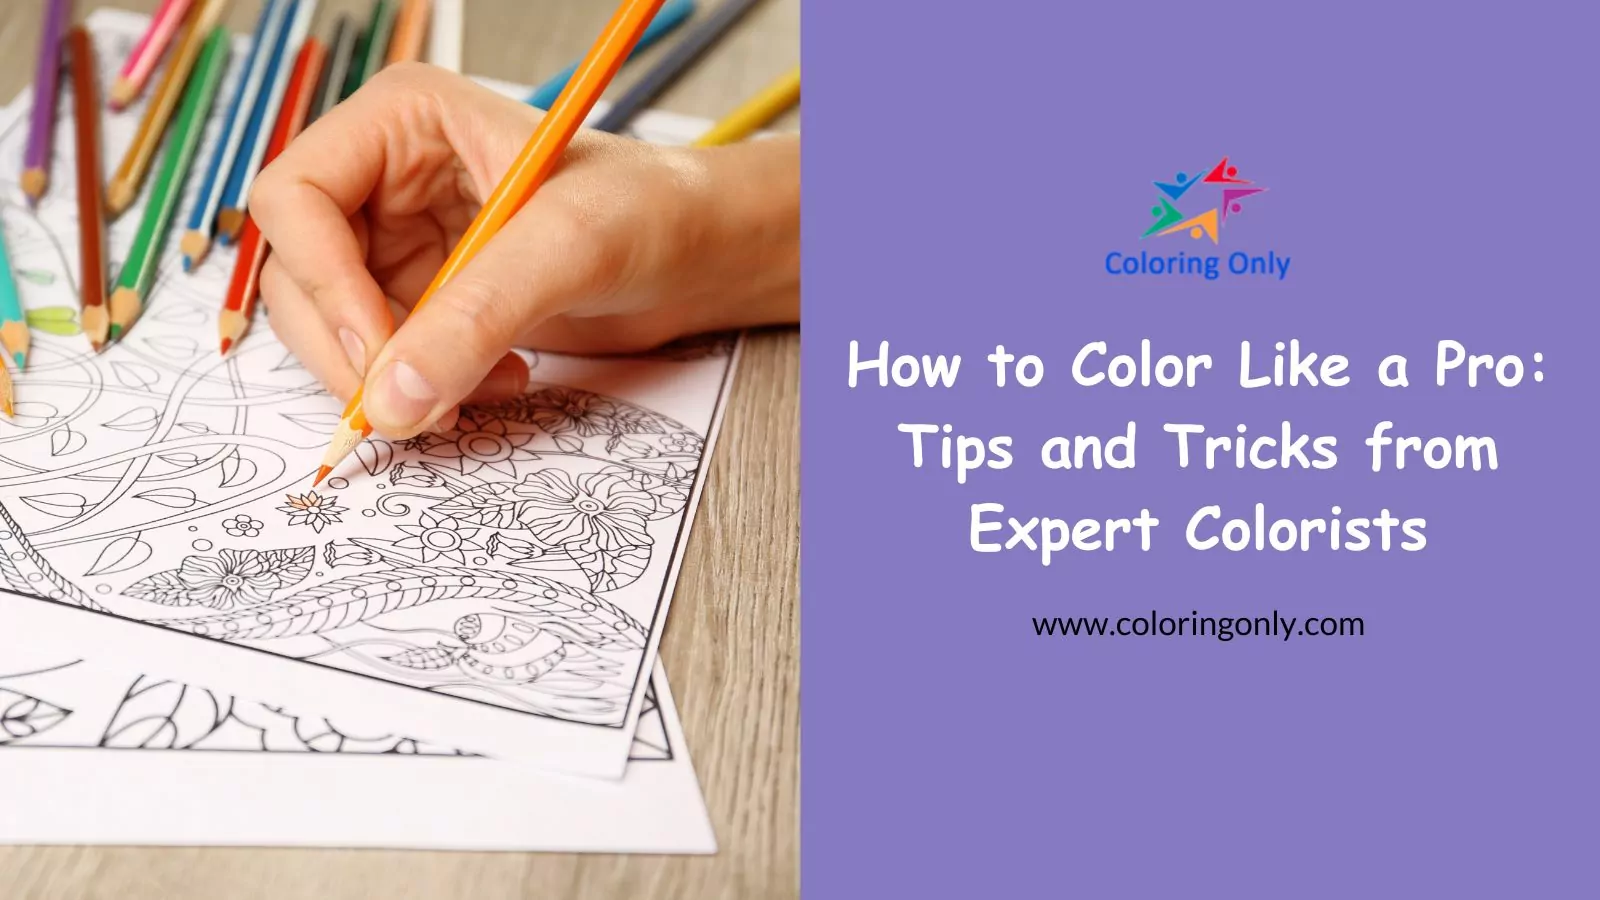 How to Color Like a Pro: Tips and Tricks from Expert Colorists